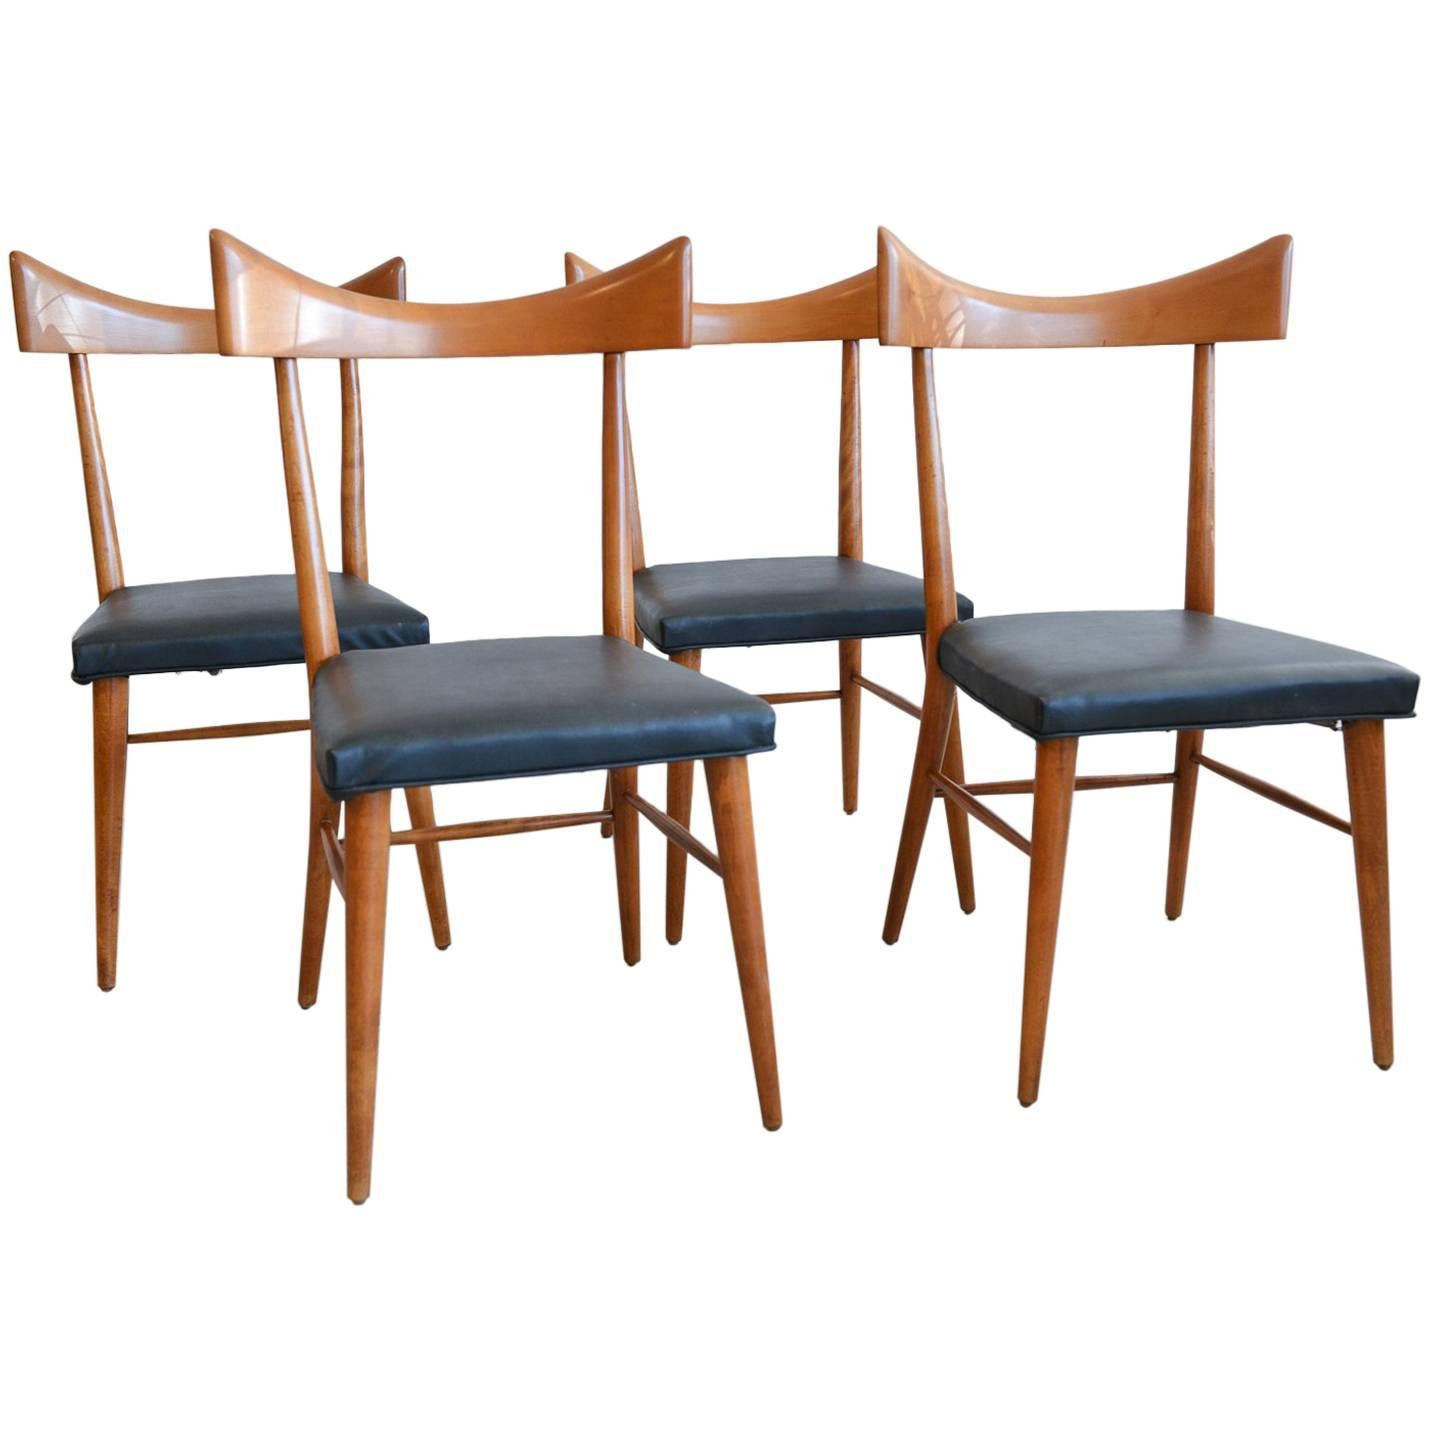 Paul McCobb Model 1534 Wingback Dining Chairs, Set of Four, circa 1955